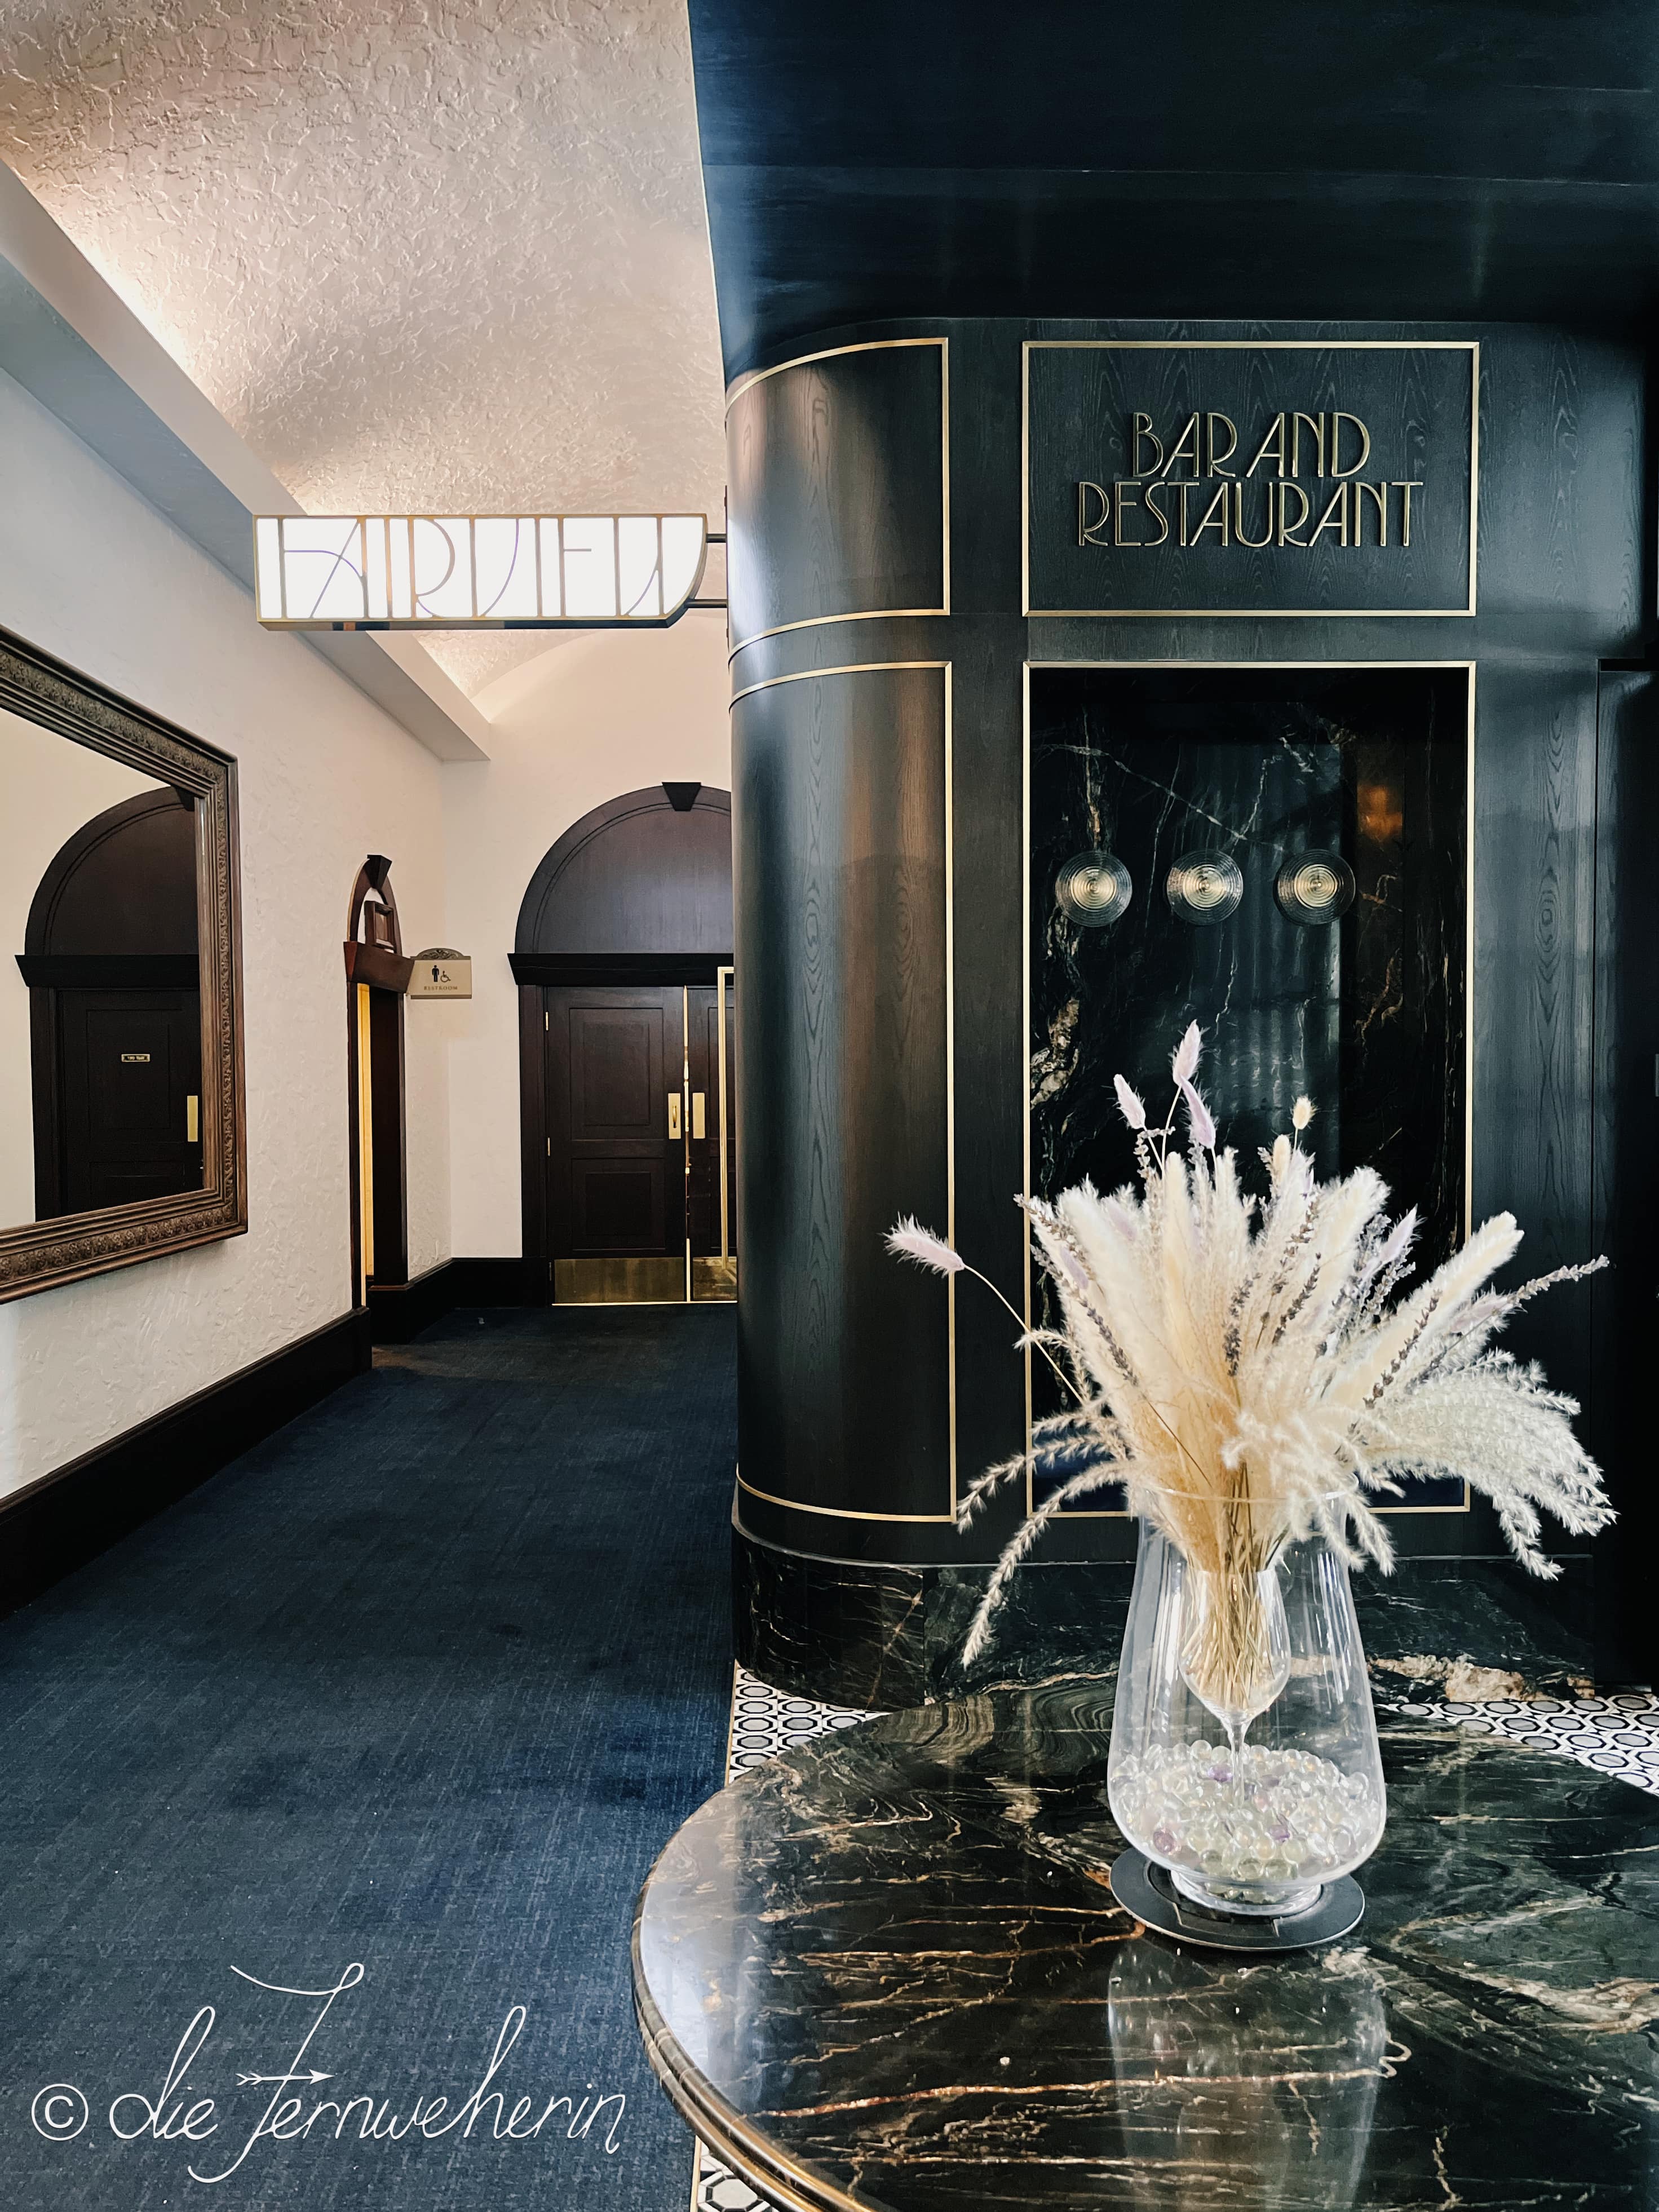 The entrance to Fairview Bar & Restaurant, located in the Fairmont Chateau Lake Louise in Banff National Park.